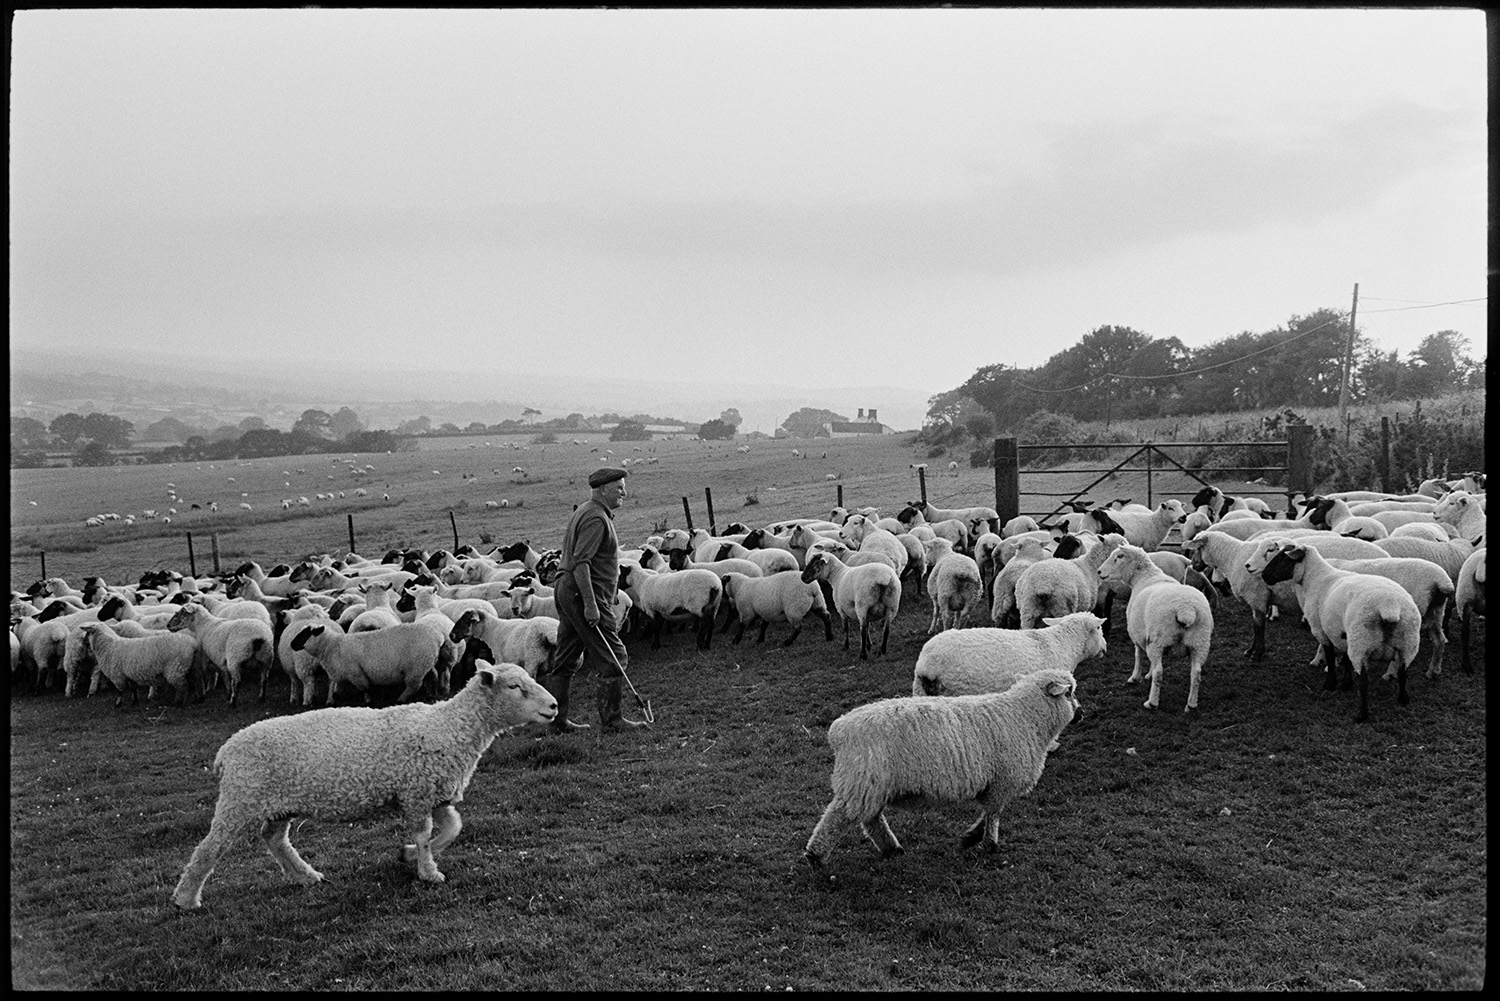 Farmers checking sheep on moor, opening gate to go home, dog. 
[A man checking sheep in a field on Hatherleigh Moor. The sheep are grouped by a field gate. Other livestock can be seen grazing in a field in the background.]